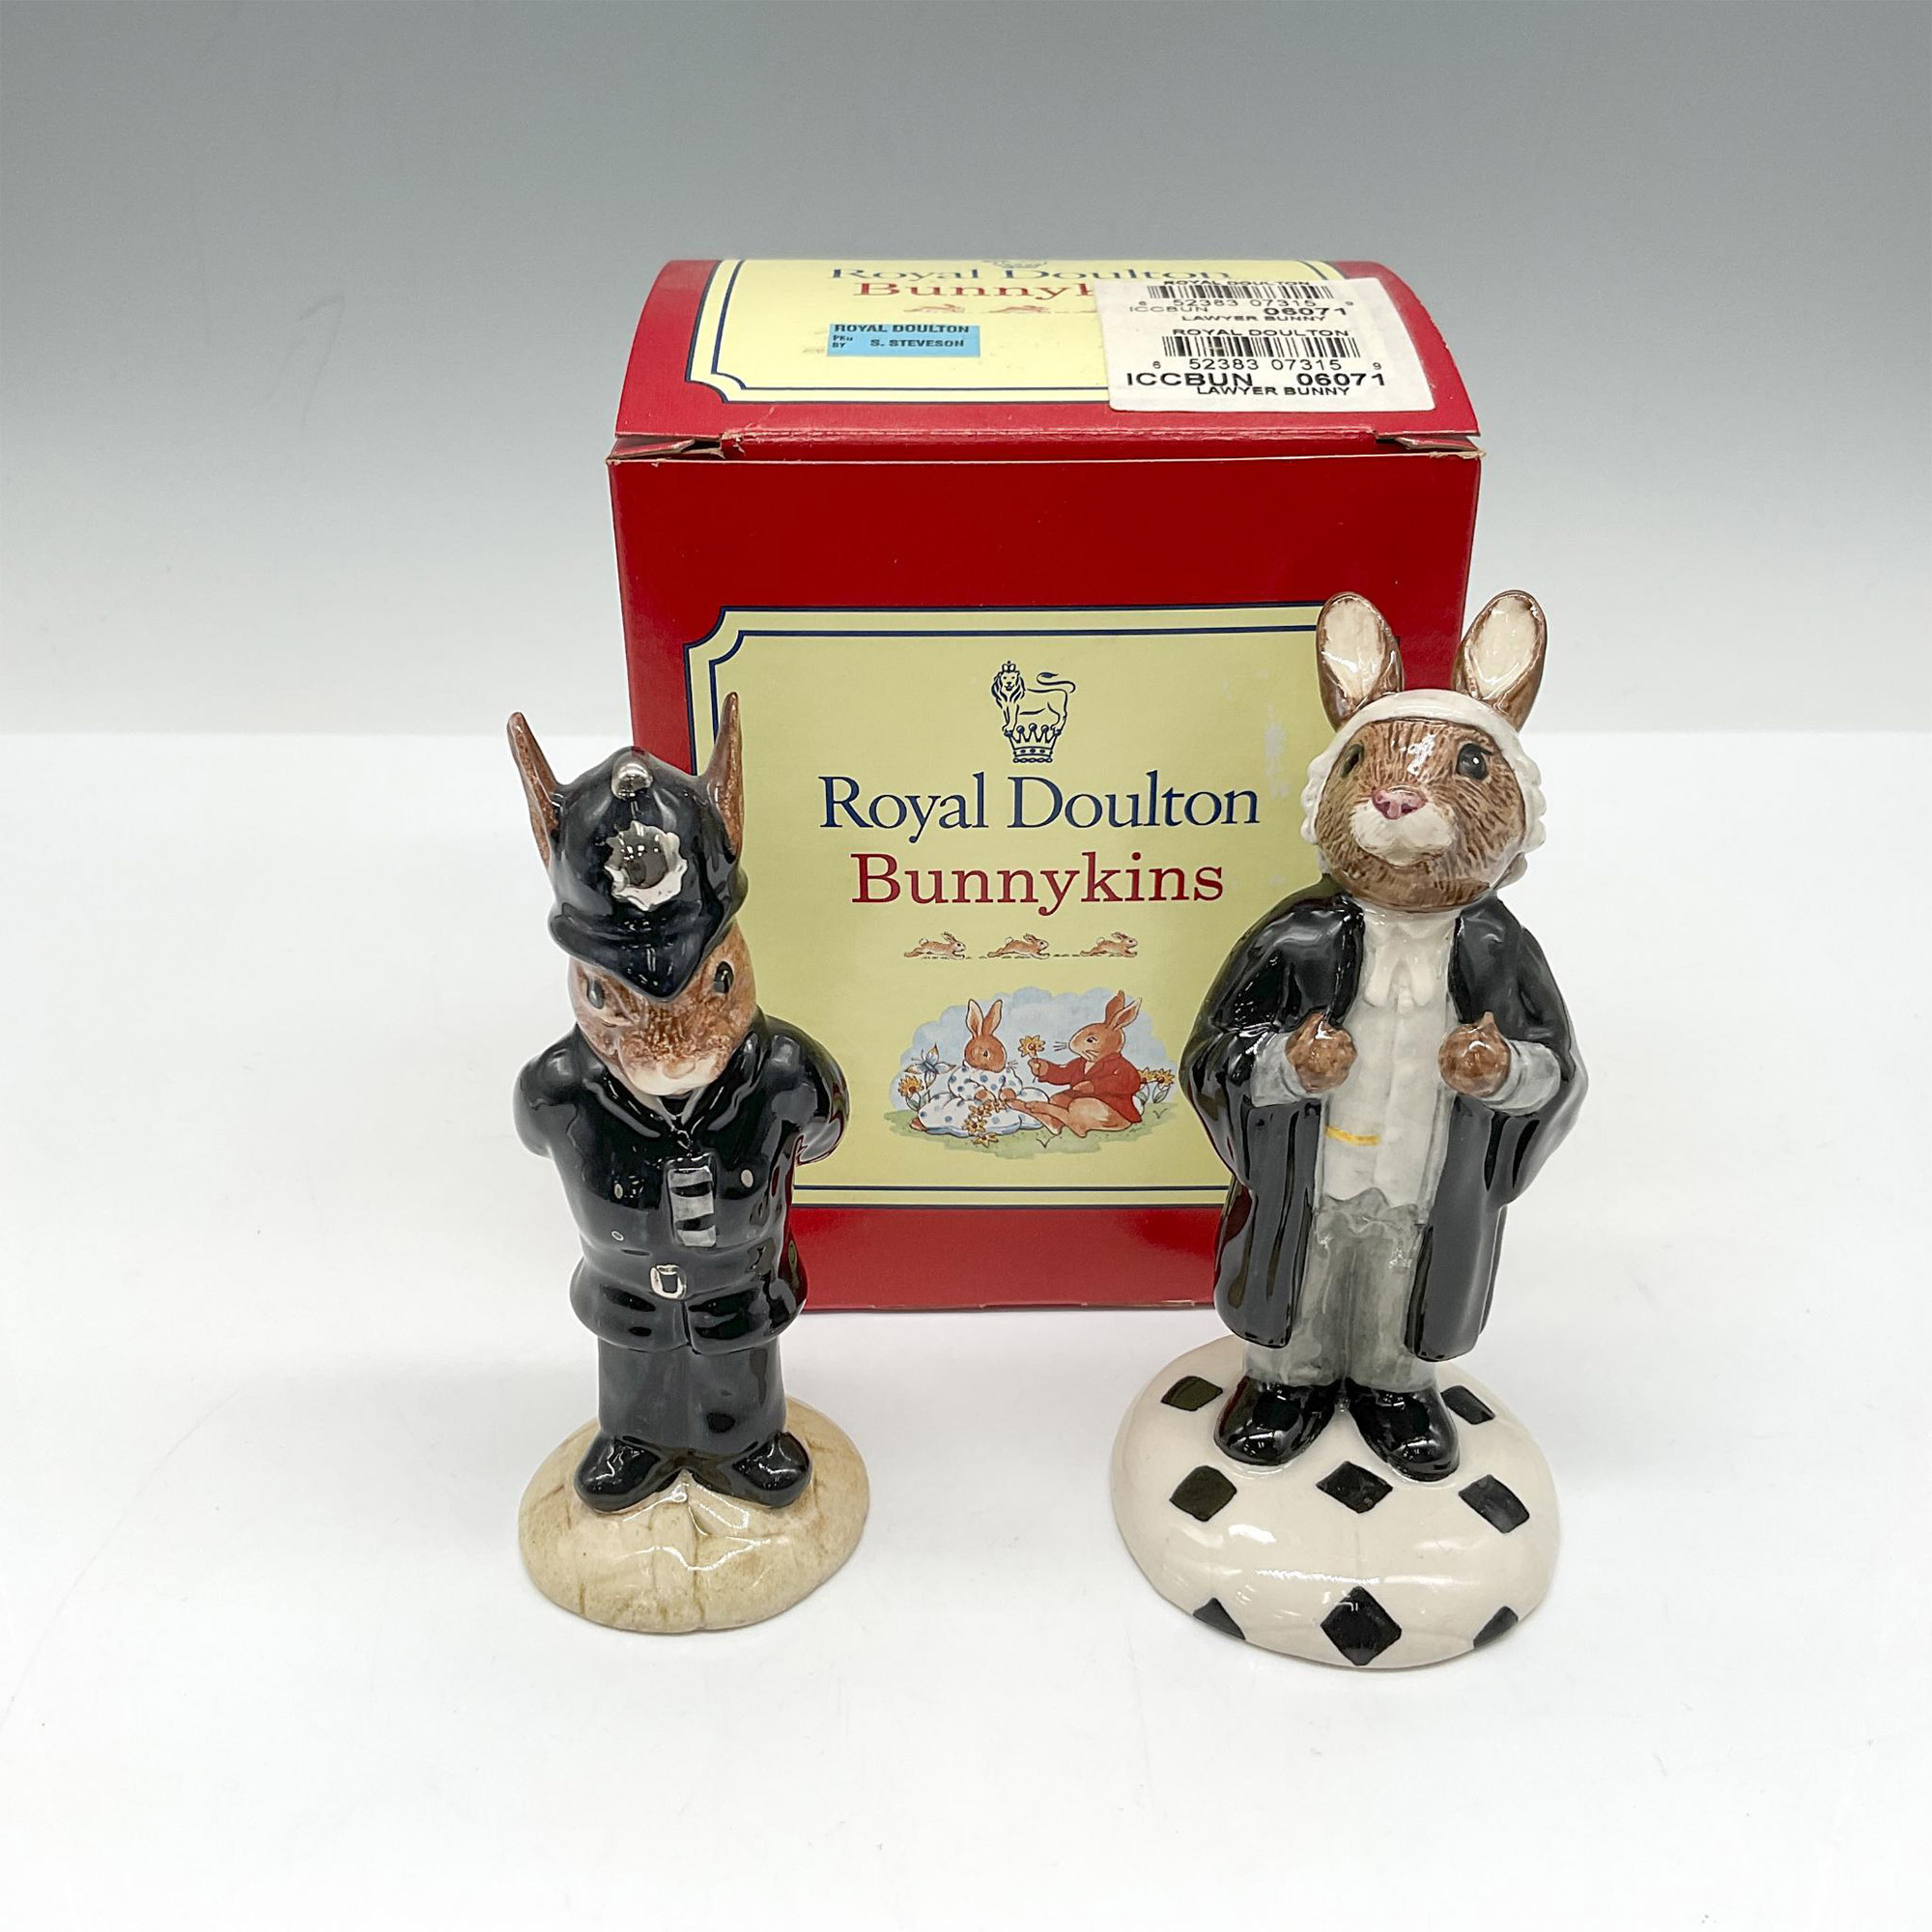 2pc Royal Doulton Bunnykins Figurines, Law Professionals DB64 + 214 - Image 4 of 4